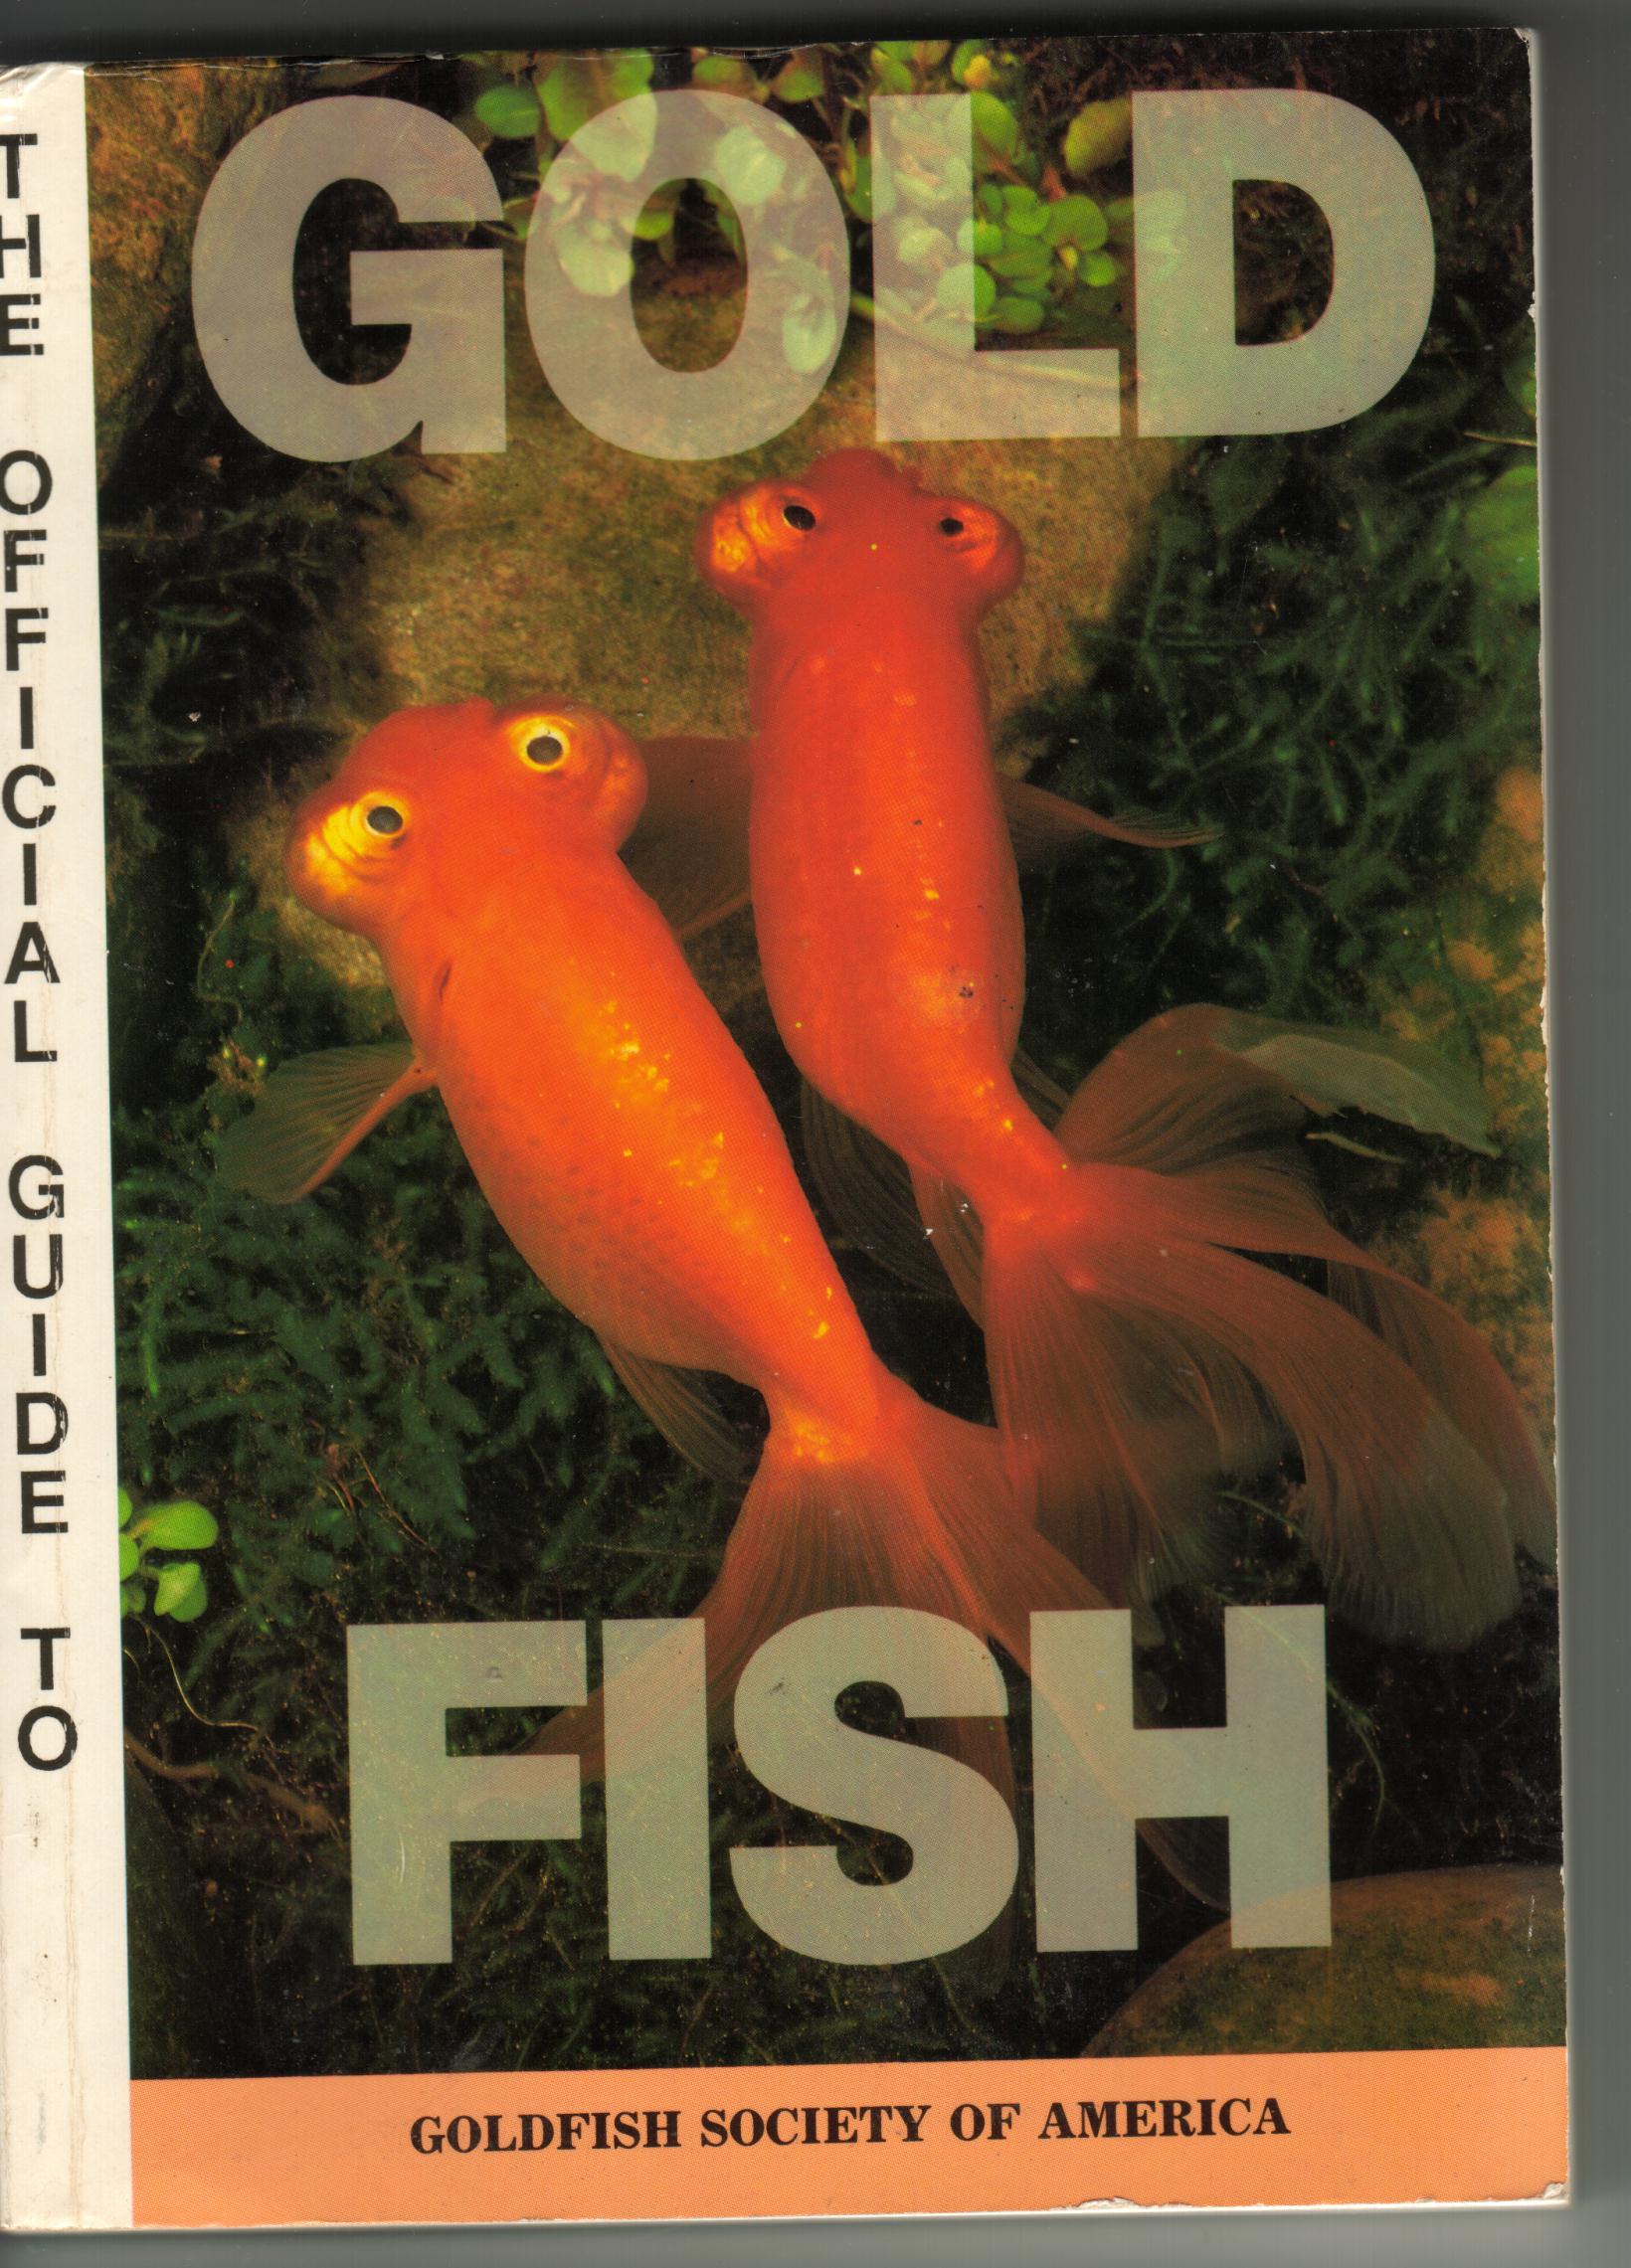 The Official guide to Goldfish